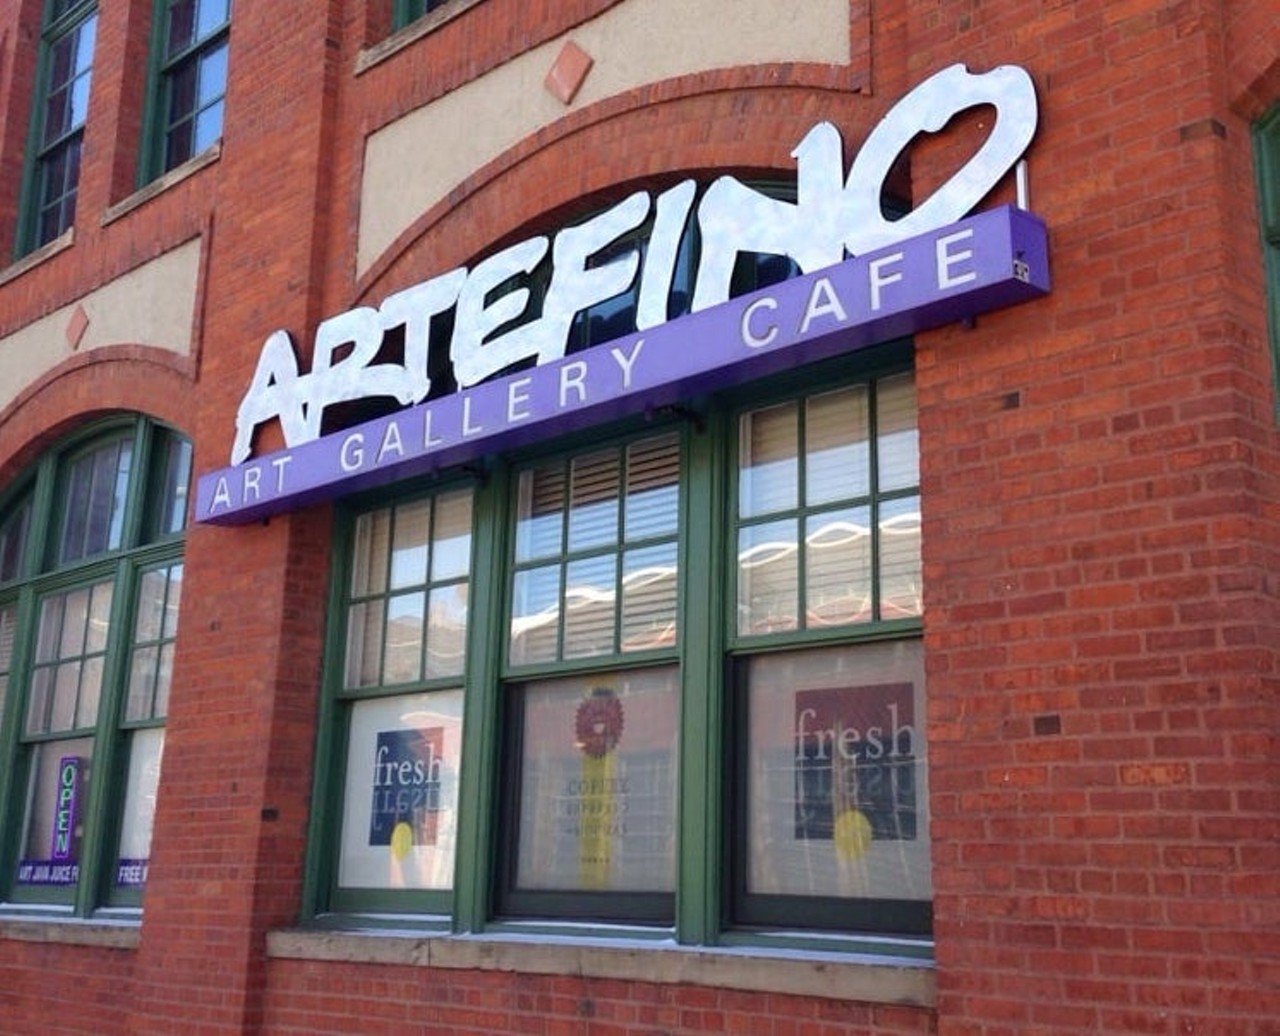  Artefino Cafe
1900 Superior Ave., Cleveland 
Delicious sandwiches named after famous artists, homemade soups and artisanally made coffee drinks are what&#146;s for lunch at this cafe, that doubles as a local art gallery to enjoy some culture with your lunch.
Photo via Artefino Cafe/Facebook